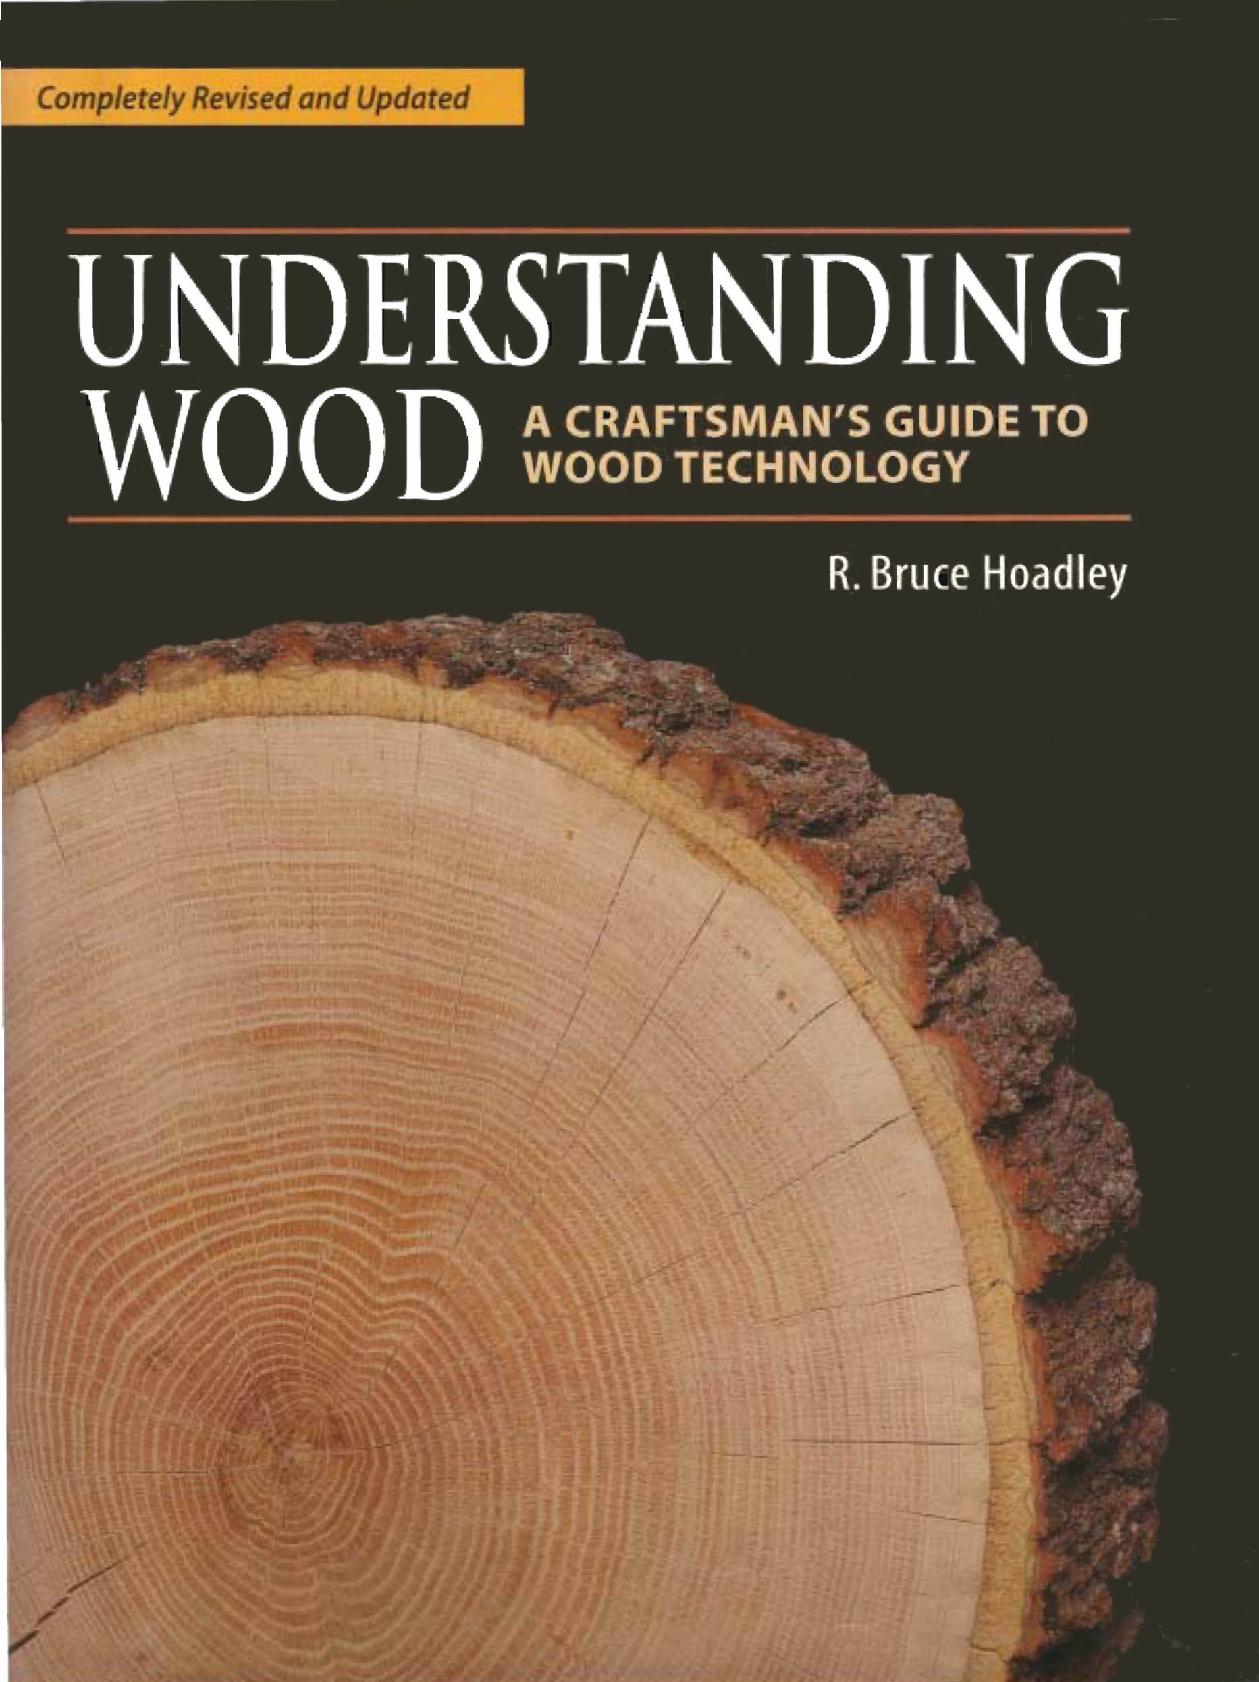 Understanding wood a craftsman's guide to wood technology   2000